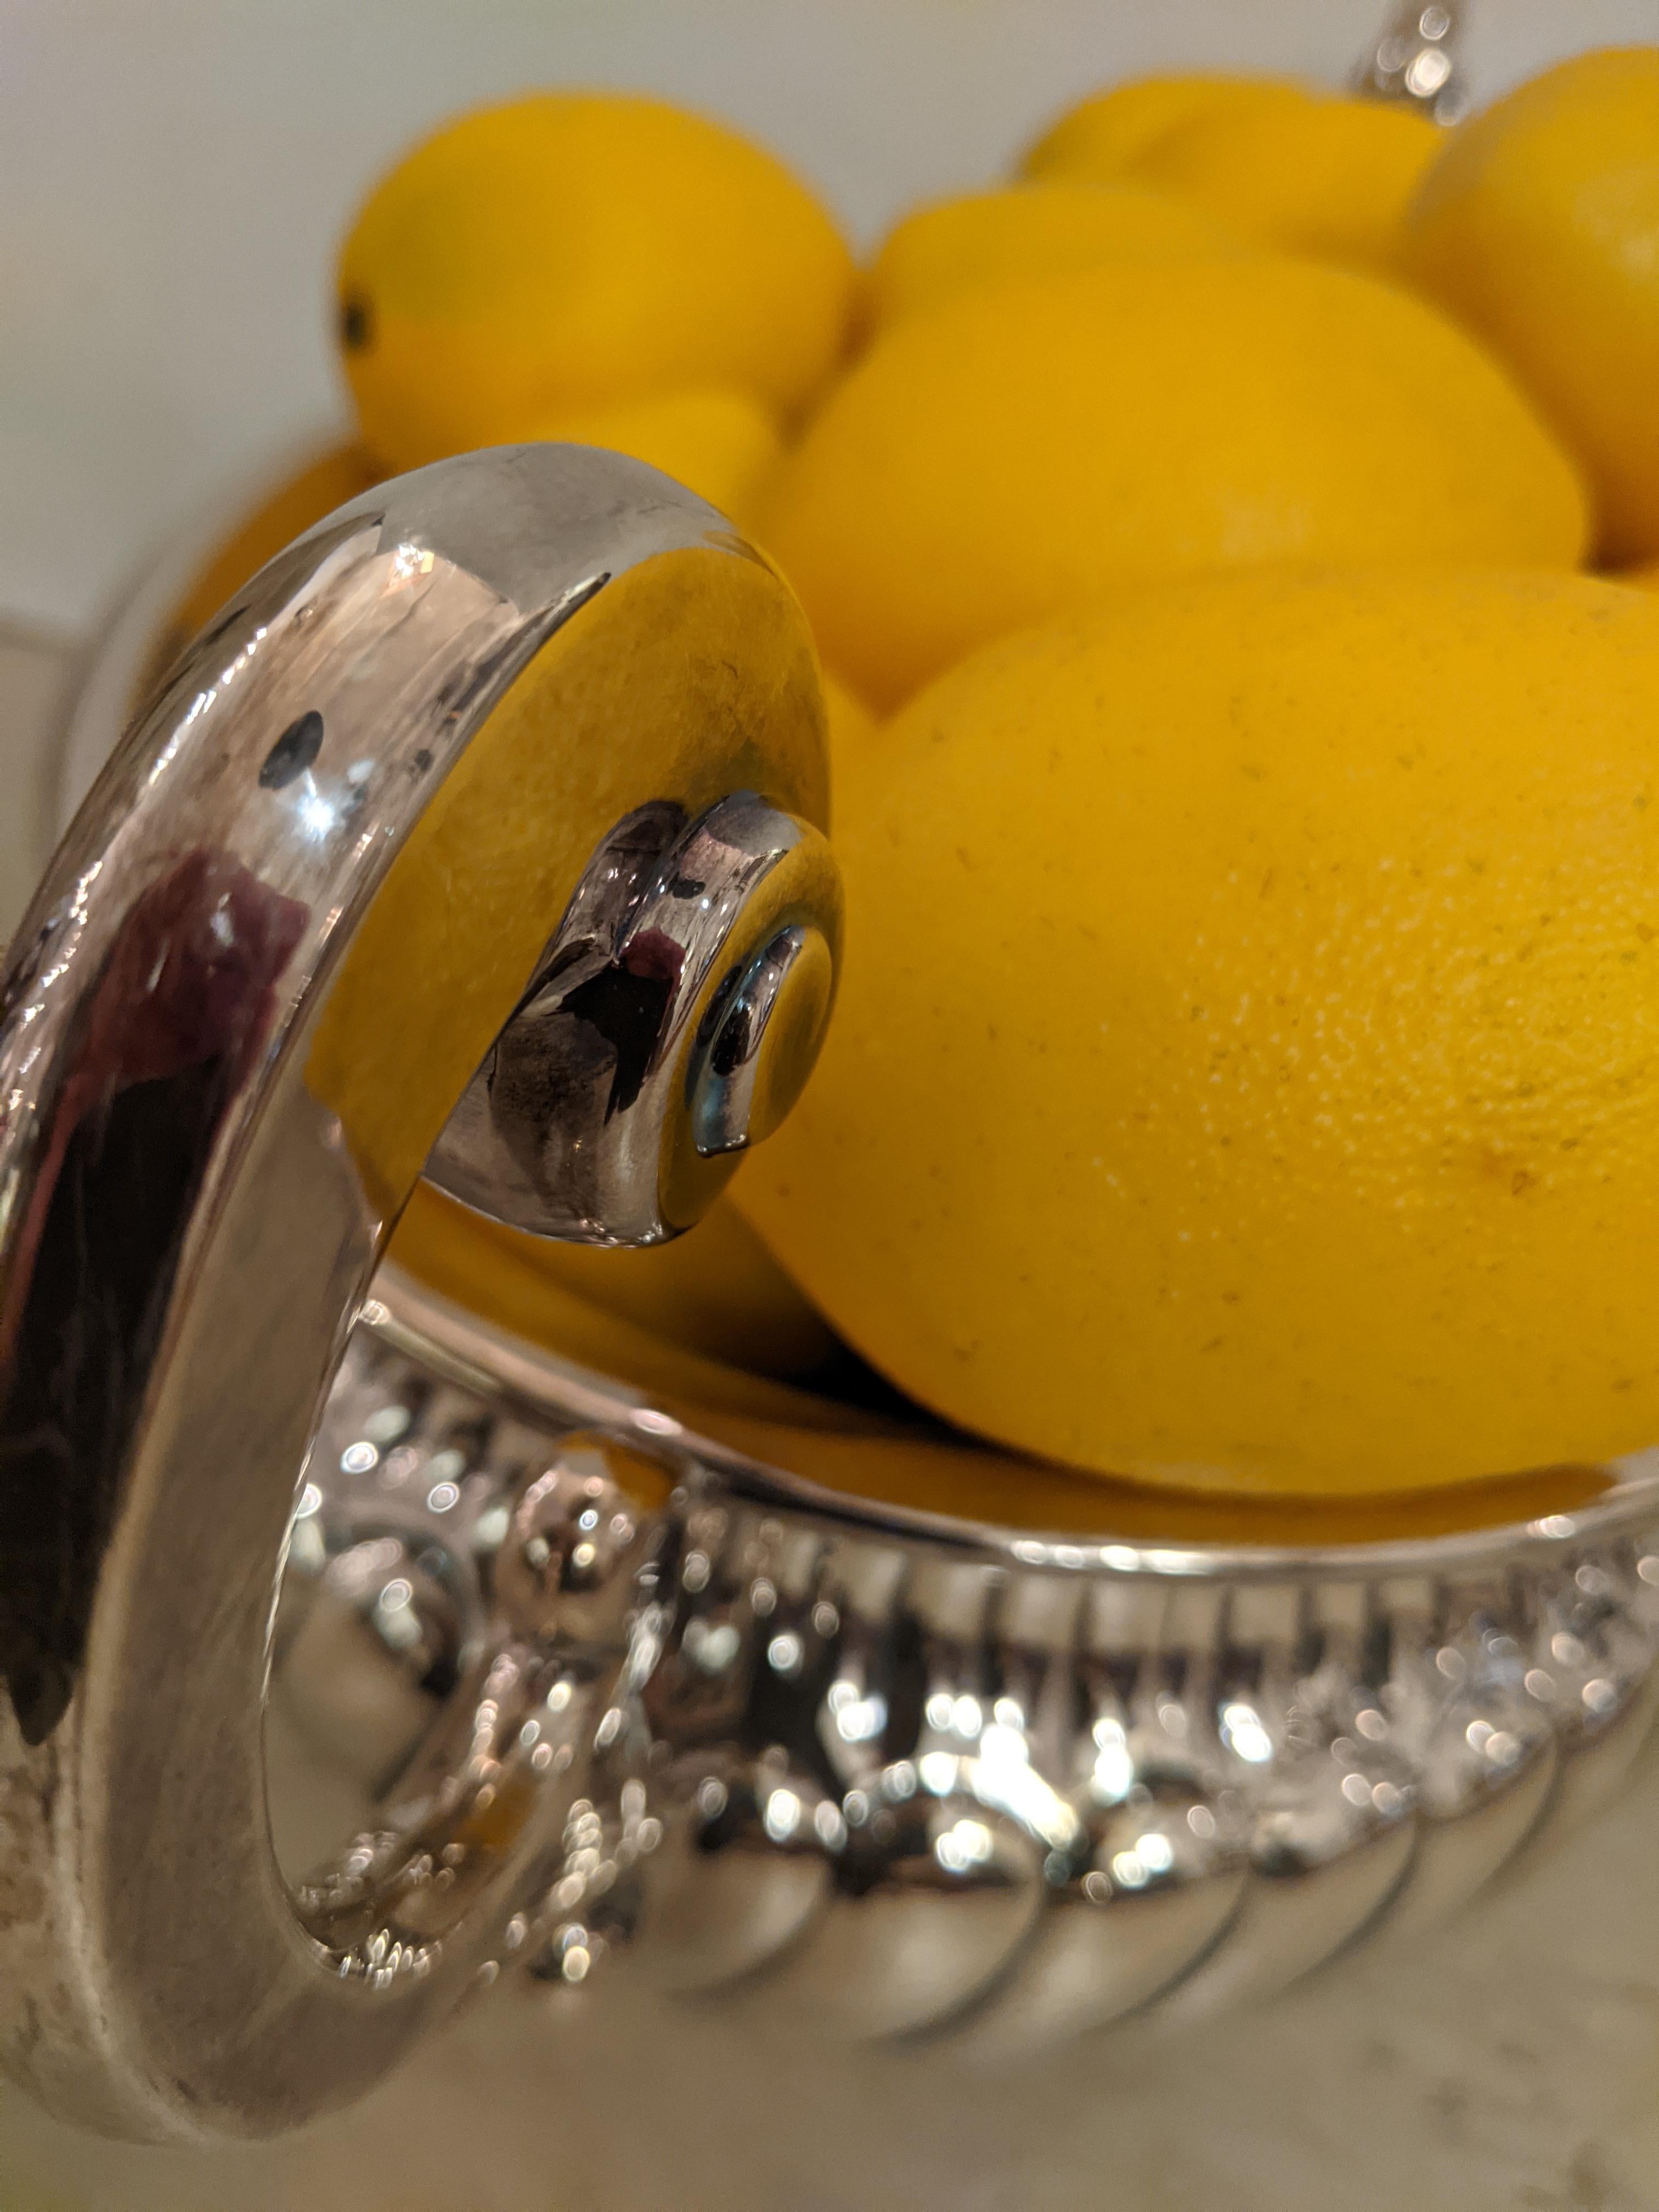 Elegant silver plate tureen with beautiful shine and details. The faux lemons are a nice touch, but can be used for display for whatever your imagination provides.
opening 7.5